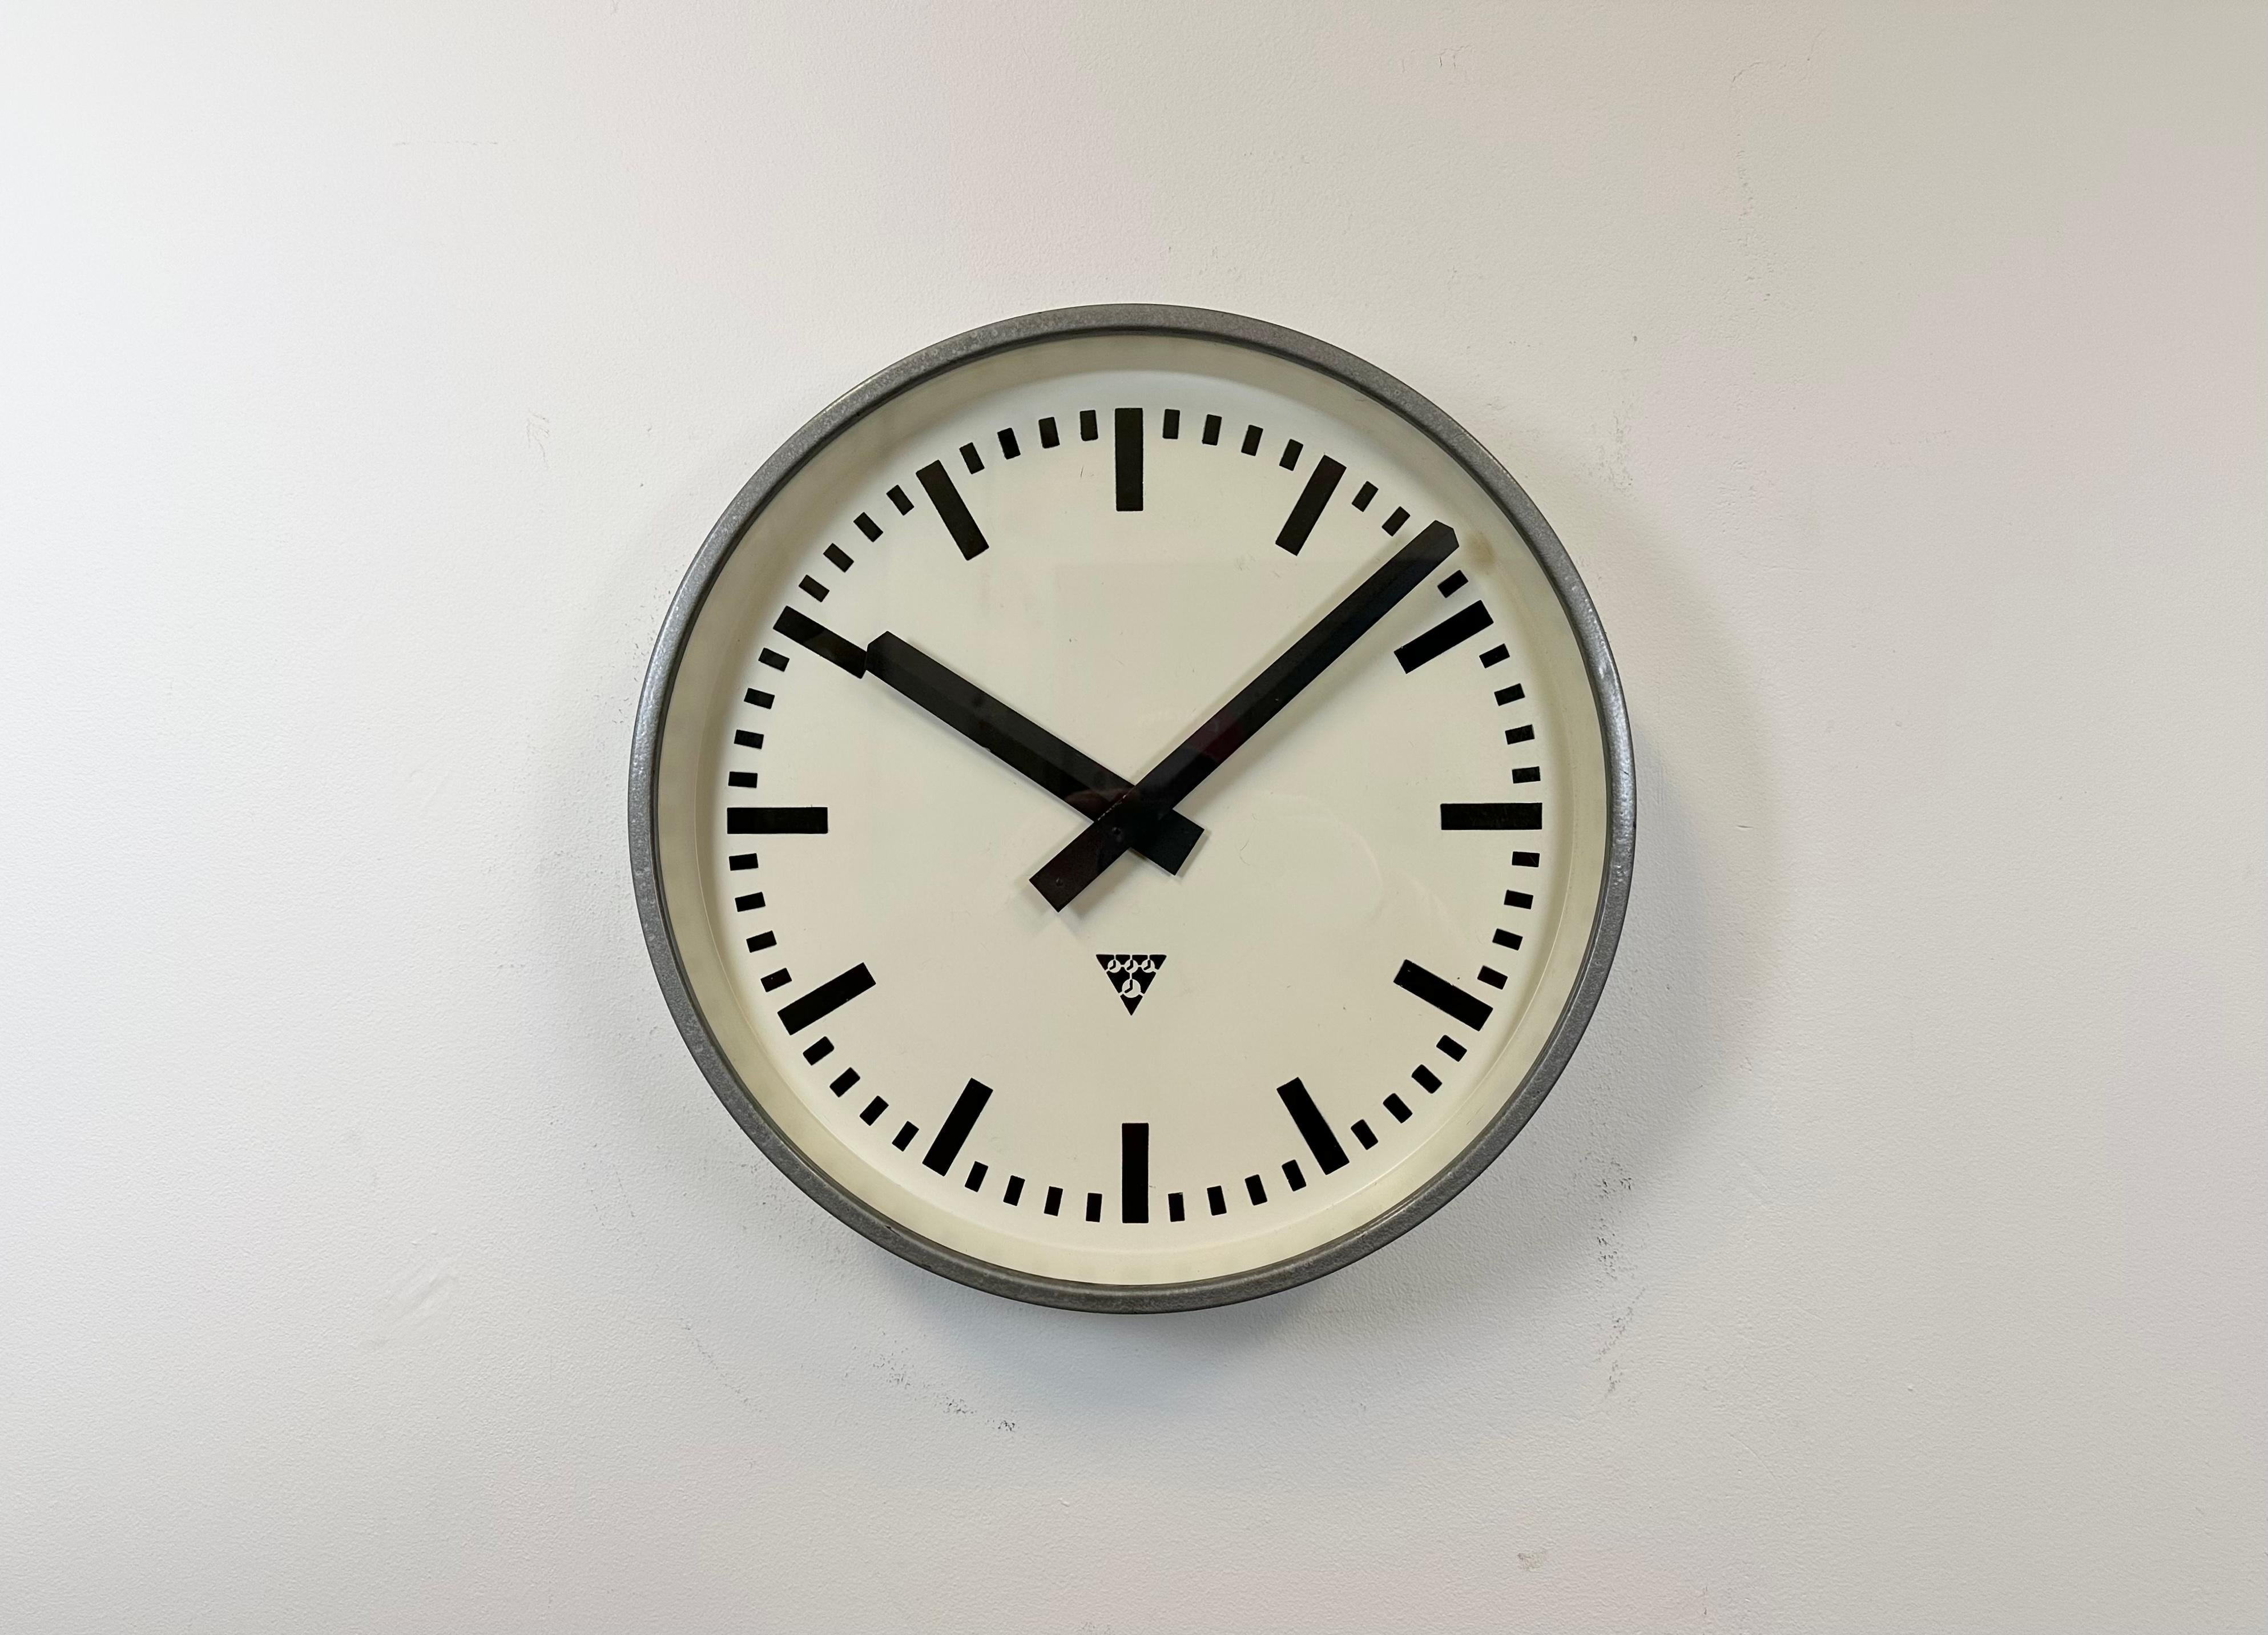 Pragotron wall clock made in former Czechoslovakia during the 1960s. It features a grey hammerpaint metal body, a metal dial and a clear glass cover. The piece has been converted into a battery-powered clockwork and requires only one AA-battery. The